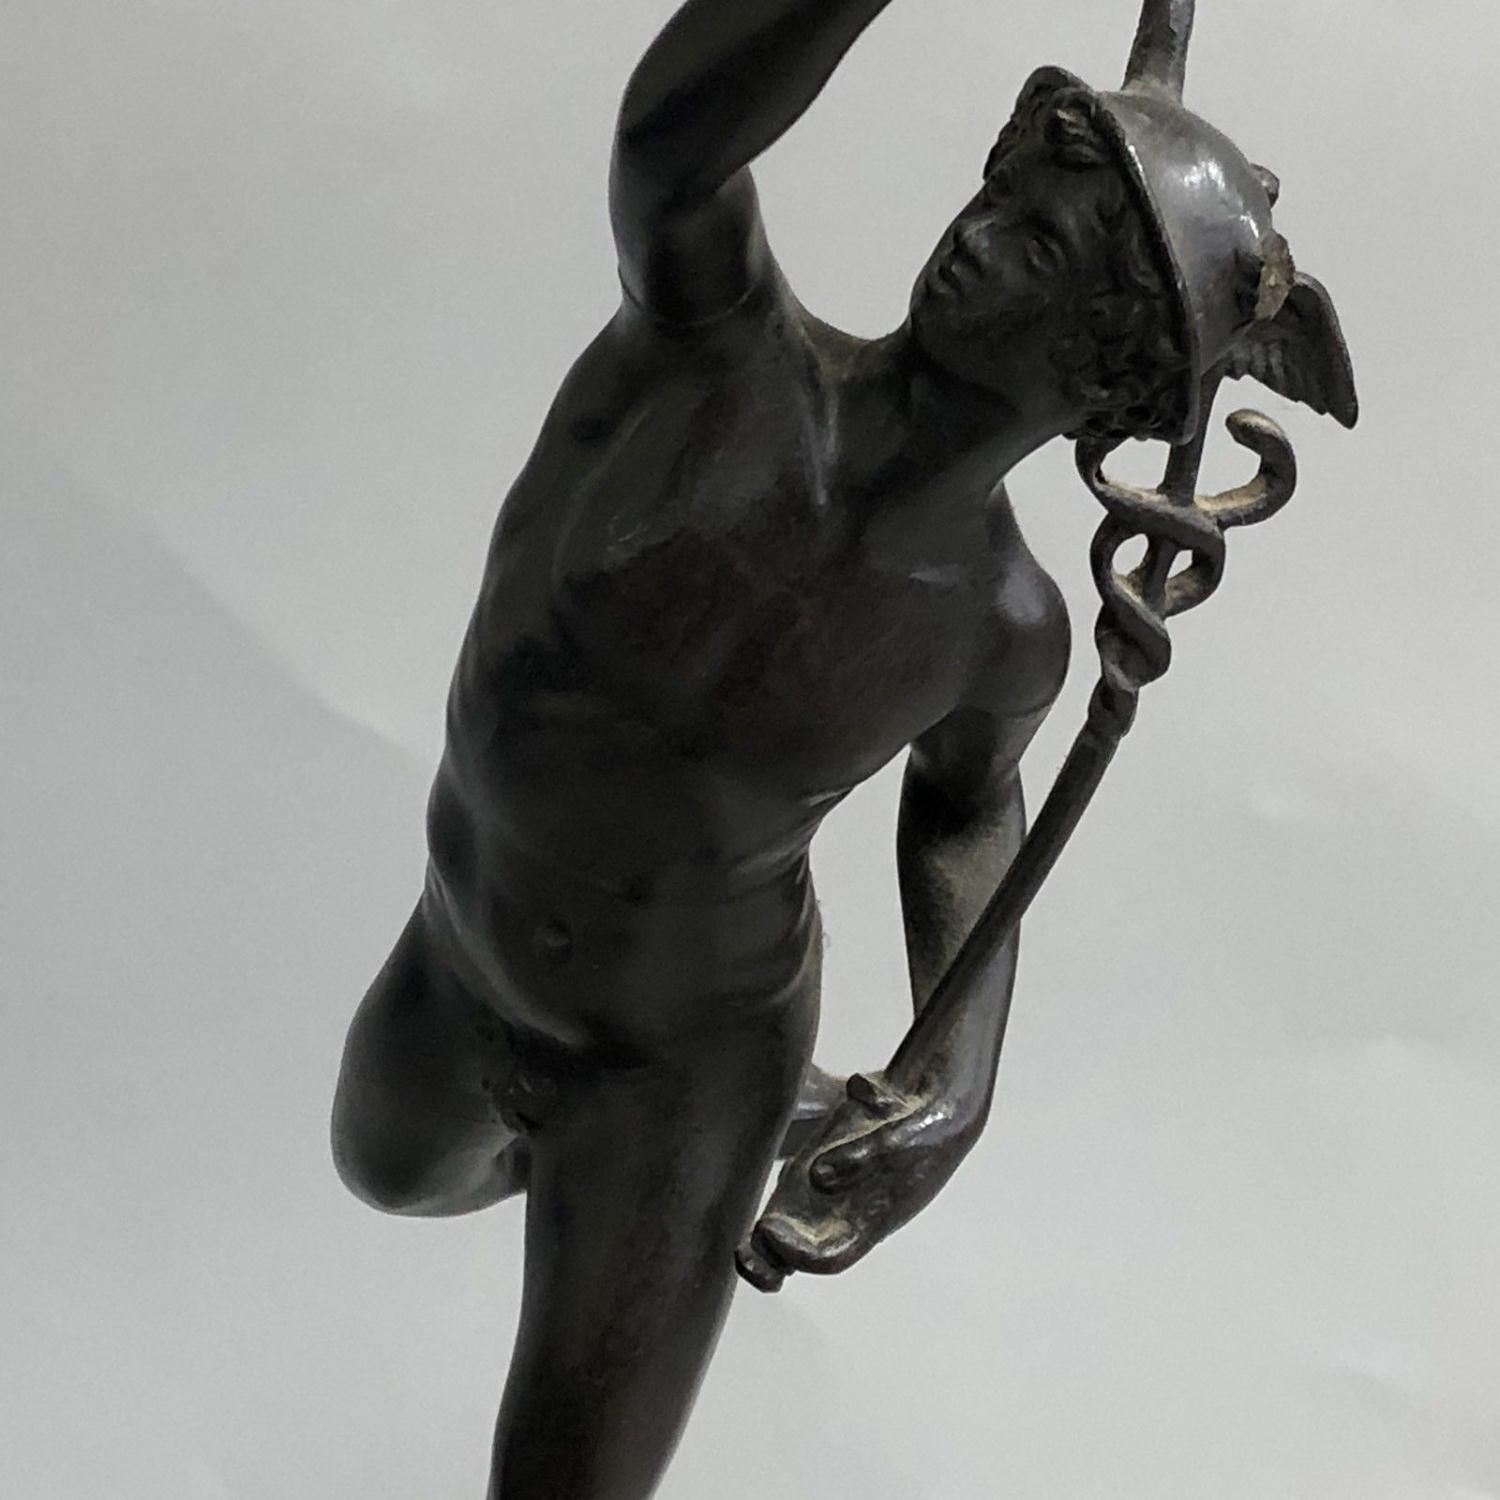 Bronzed Metal Figure of Winged Flying Mercury on Marble Base (after Bologna) - Image 2 of 6